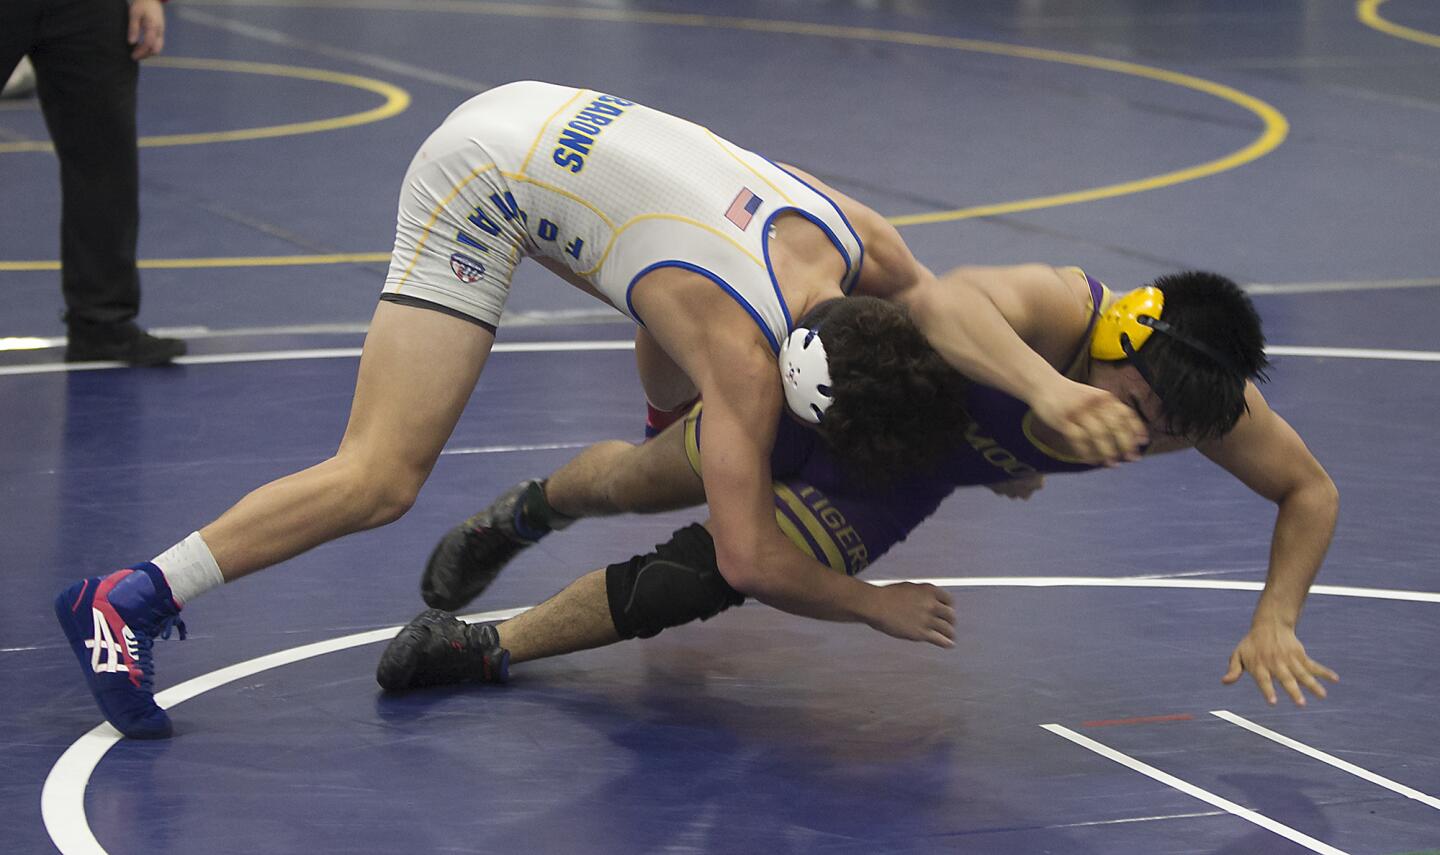 Five Counties Invitational Wrestling tournament